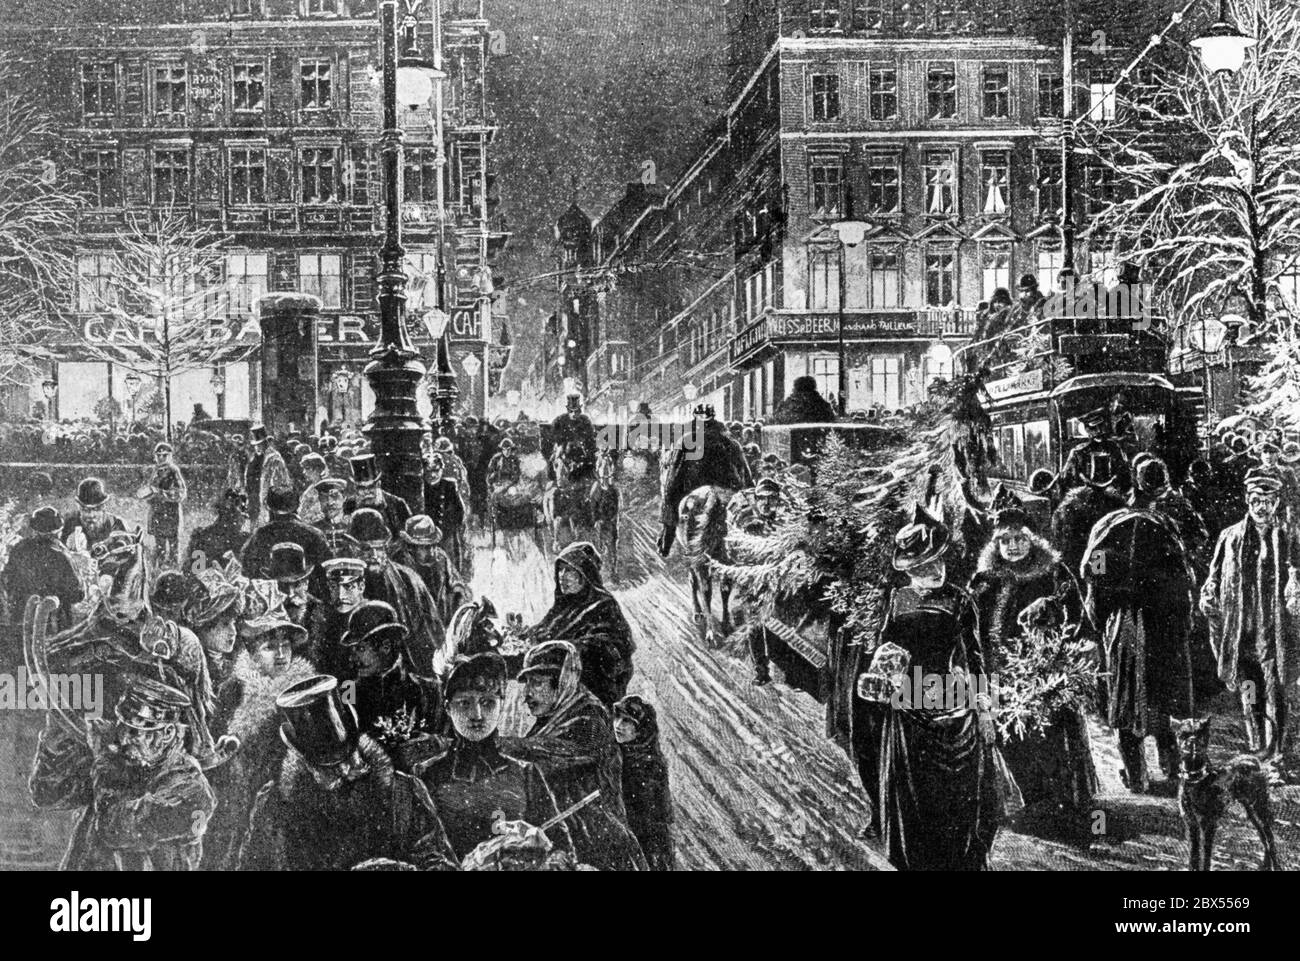 Christmas Eve in Berlin. Passers-by carry their purchased gifts through the pre-Christmas Berlin, and there is heavy traffic on the streets. In the building on the left is the Cafe Bauer, on the right a shop of Schneider Weiss & Beer. After a wood engraving by Friedrich Stahl. Stock Photo